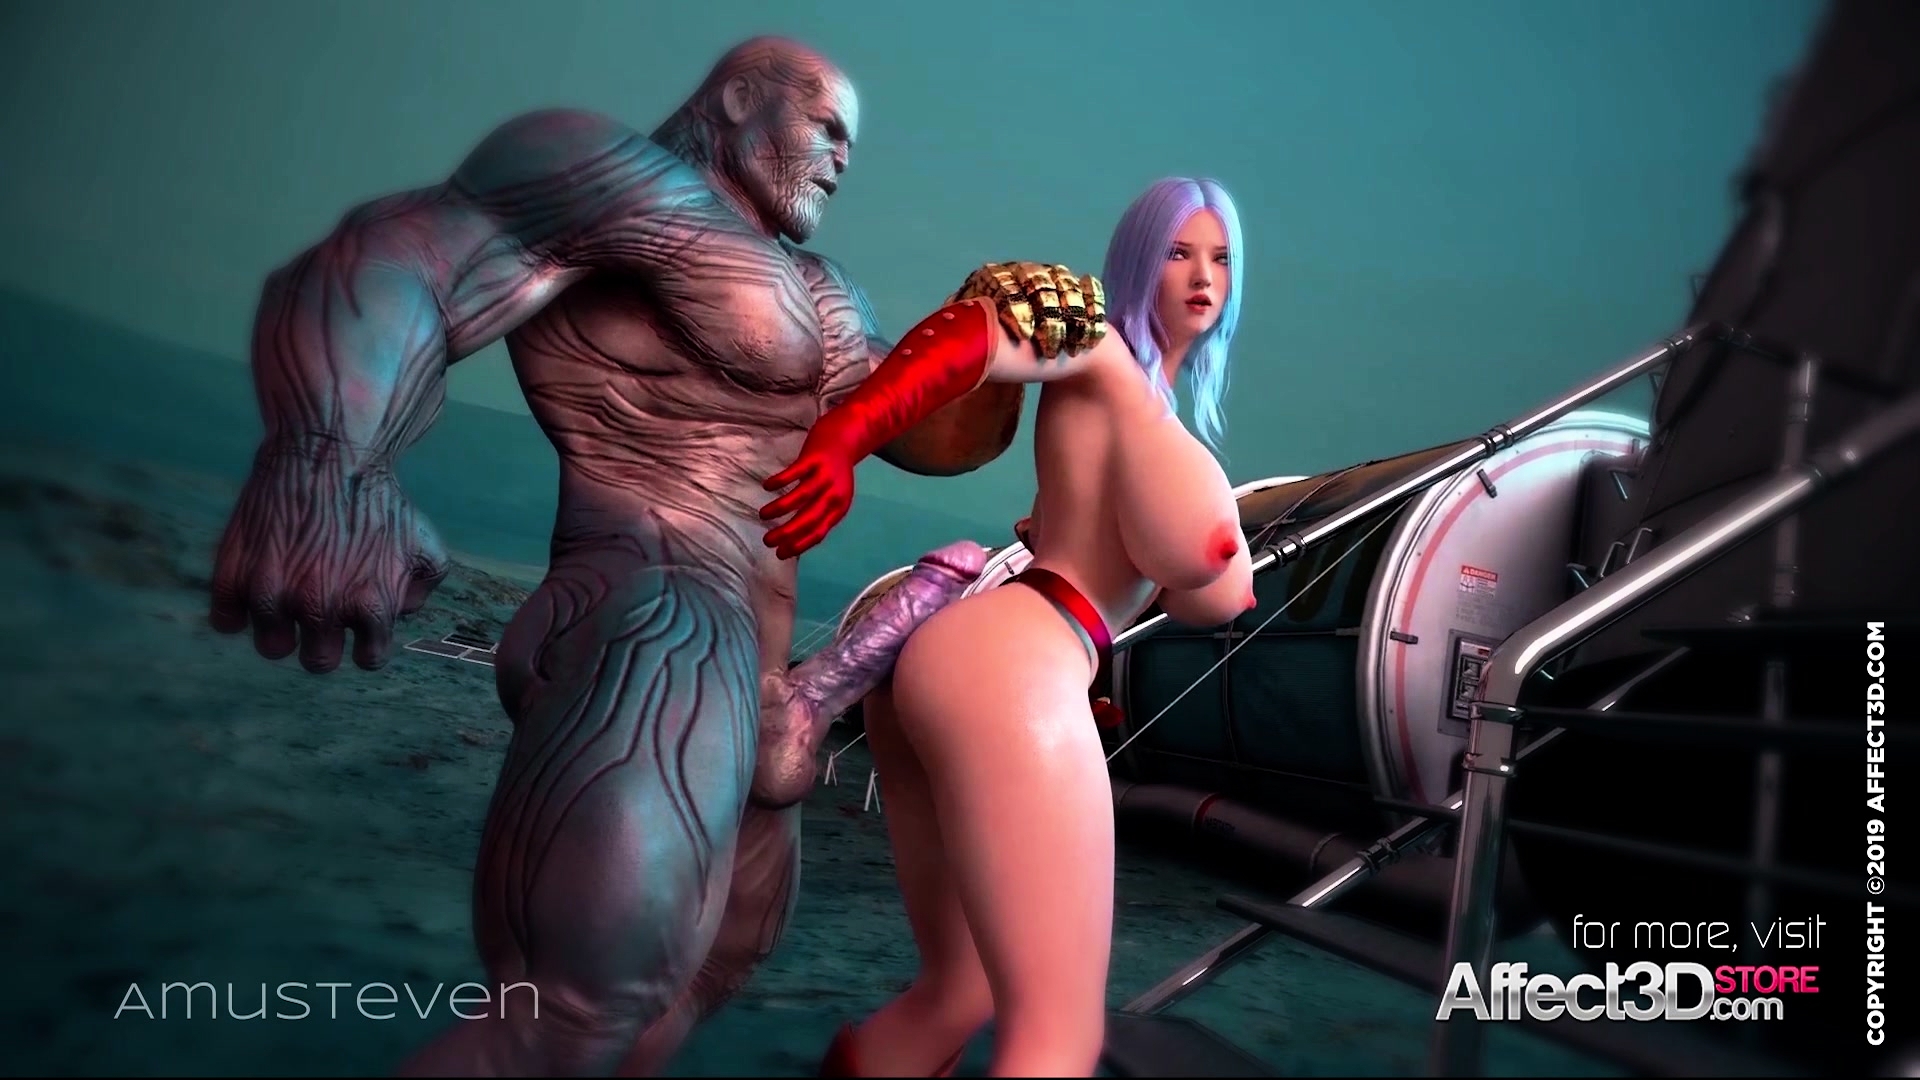 3d Animation Porn Videos With Huge Tits - Superhero 3d Animation With A Big Tits Beauty at Nuvid